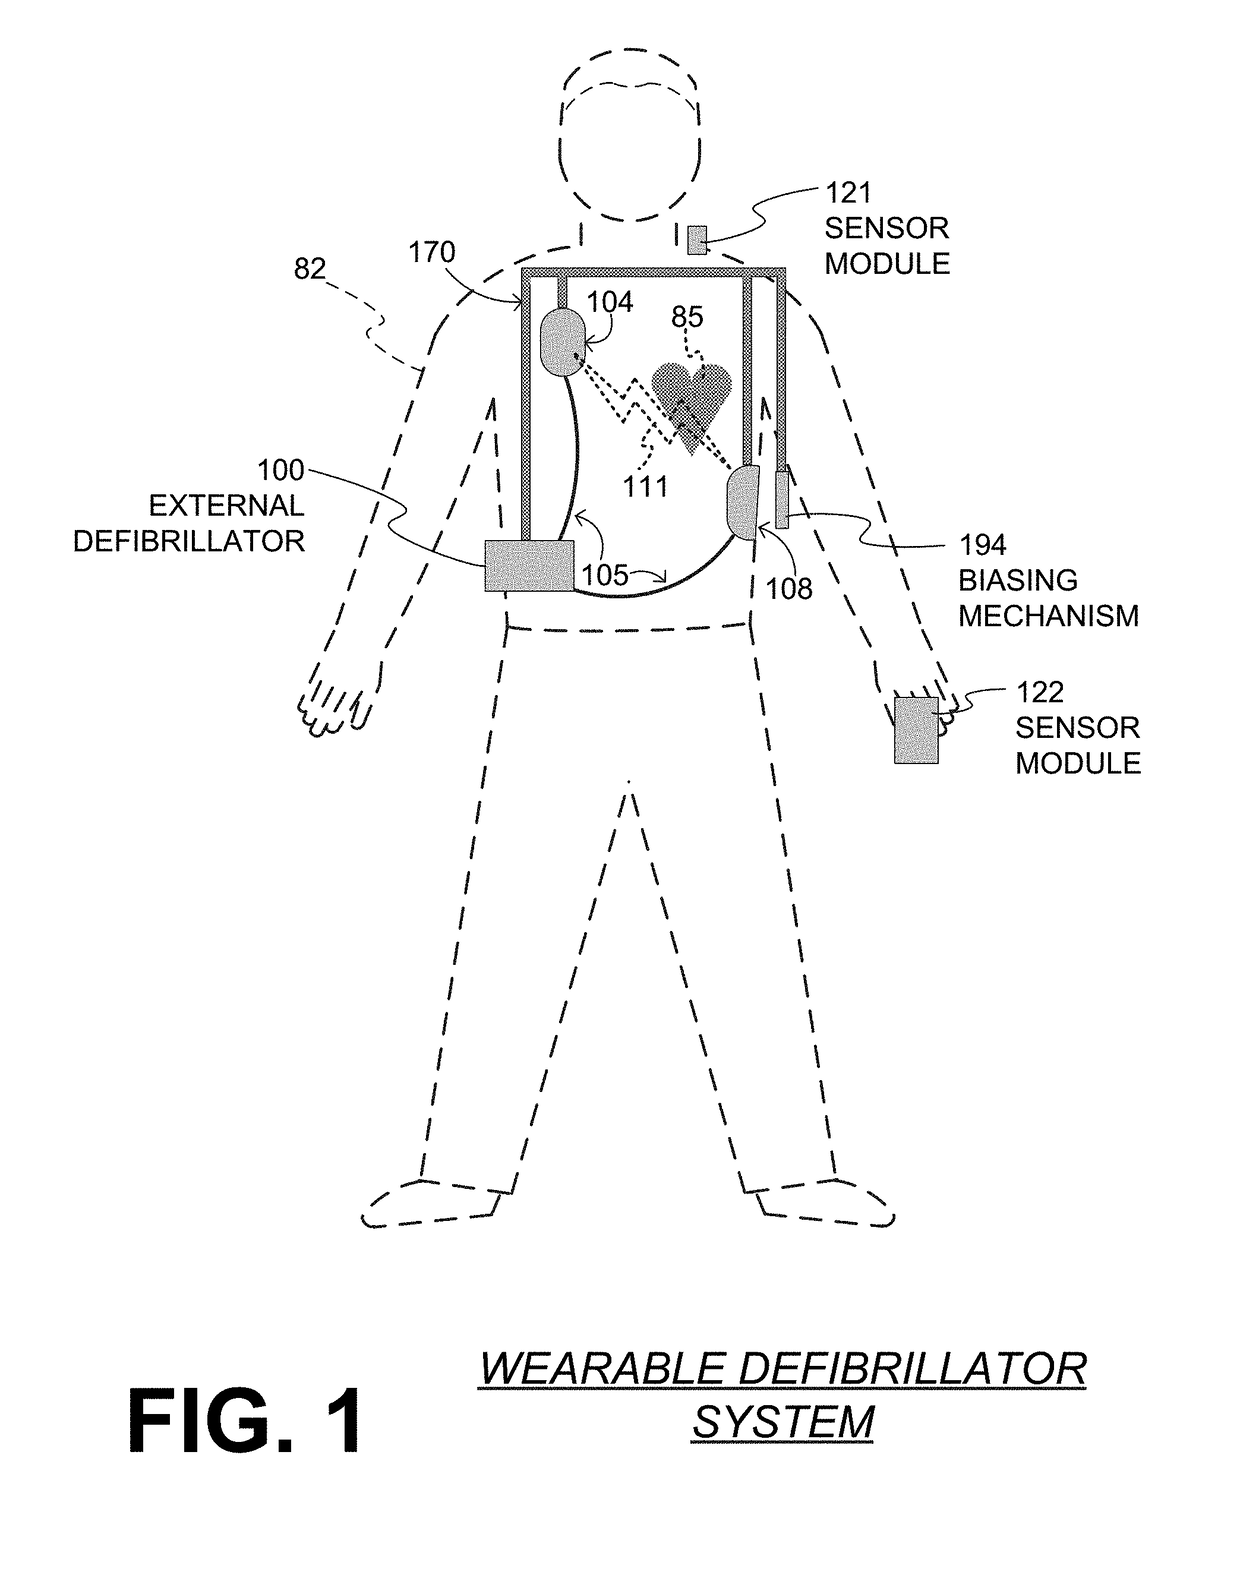 Wearable cardiac defibrillator system long-term monitoring alternating patient parameters other than ECG